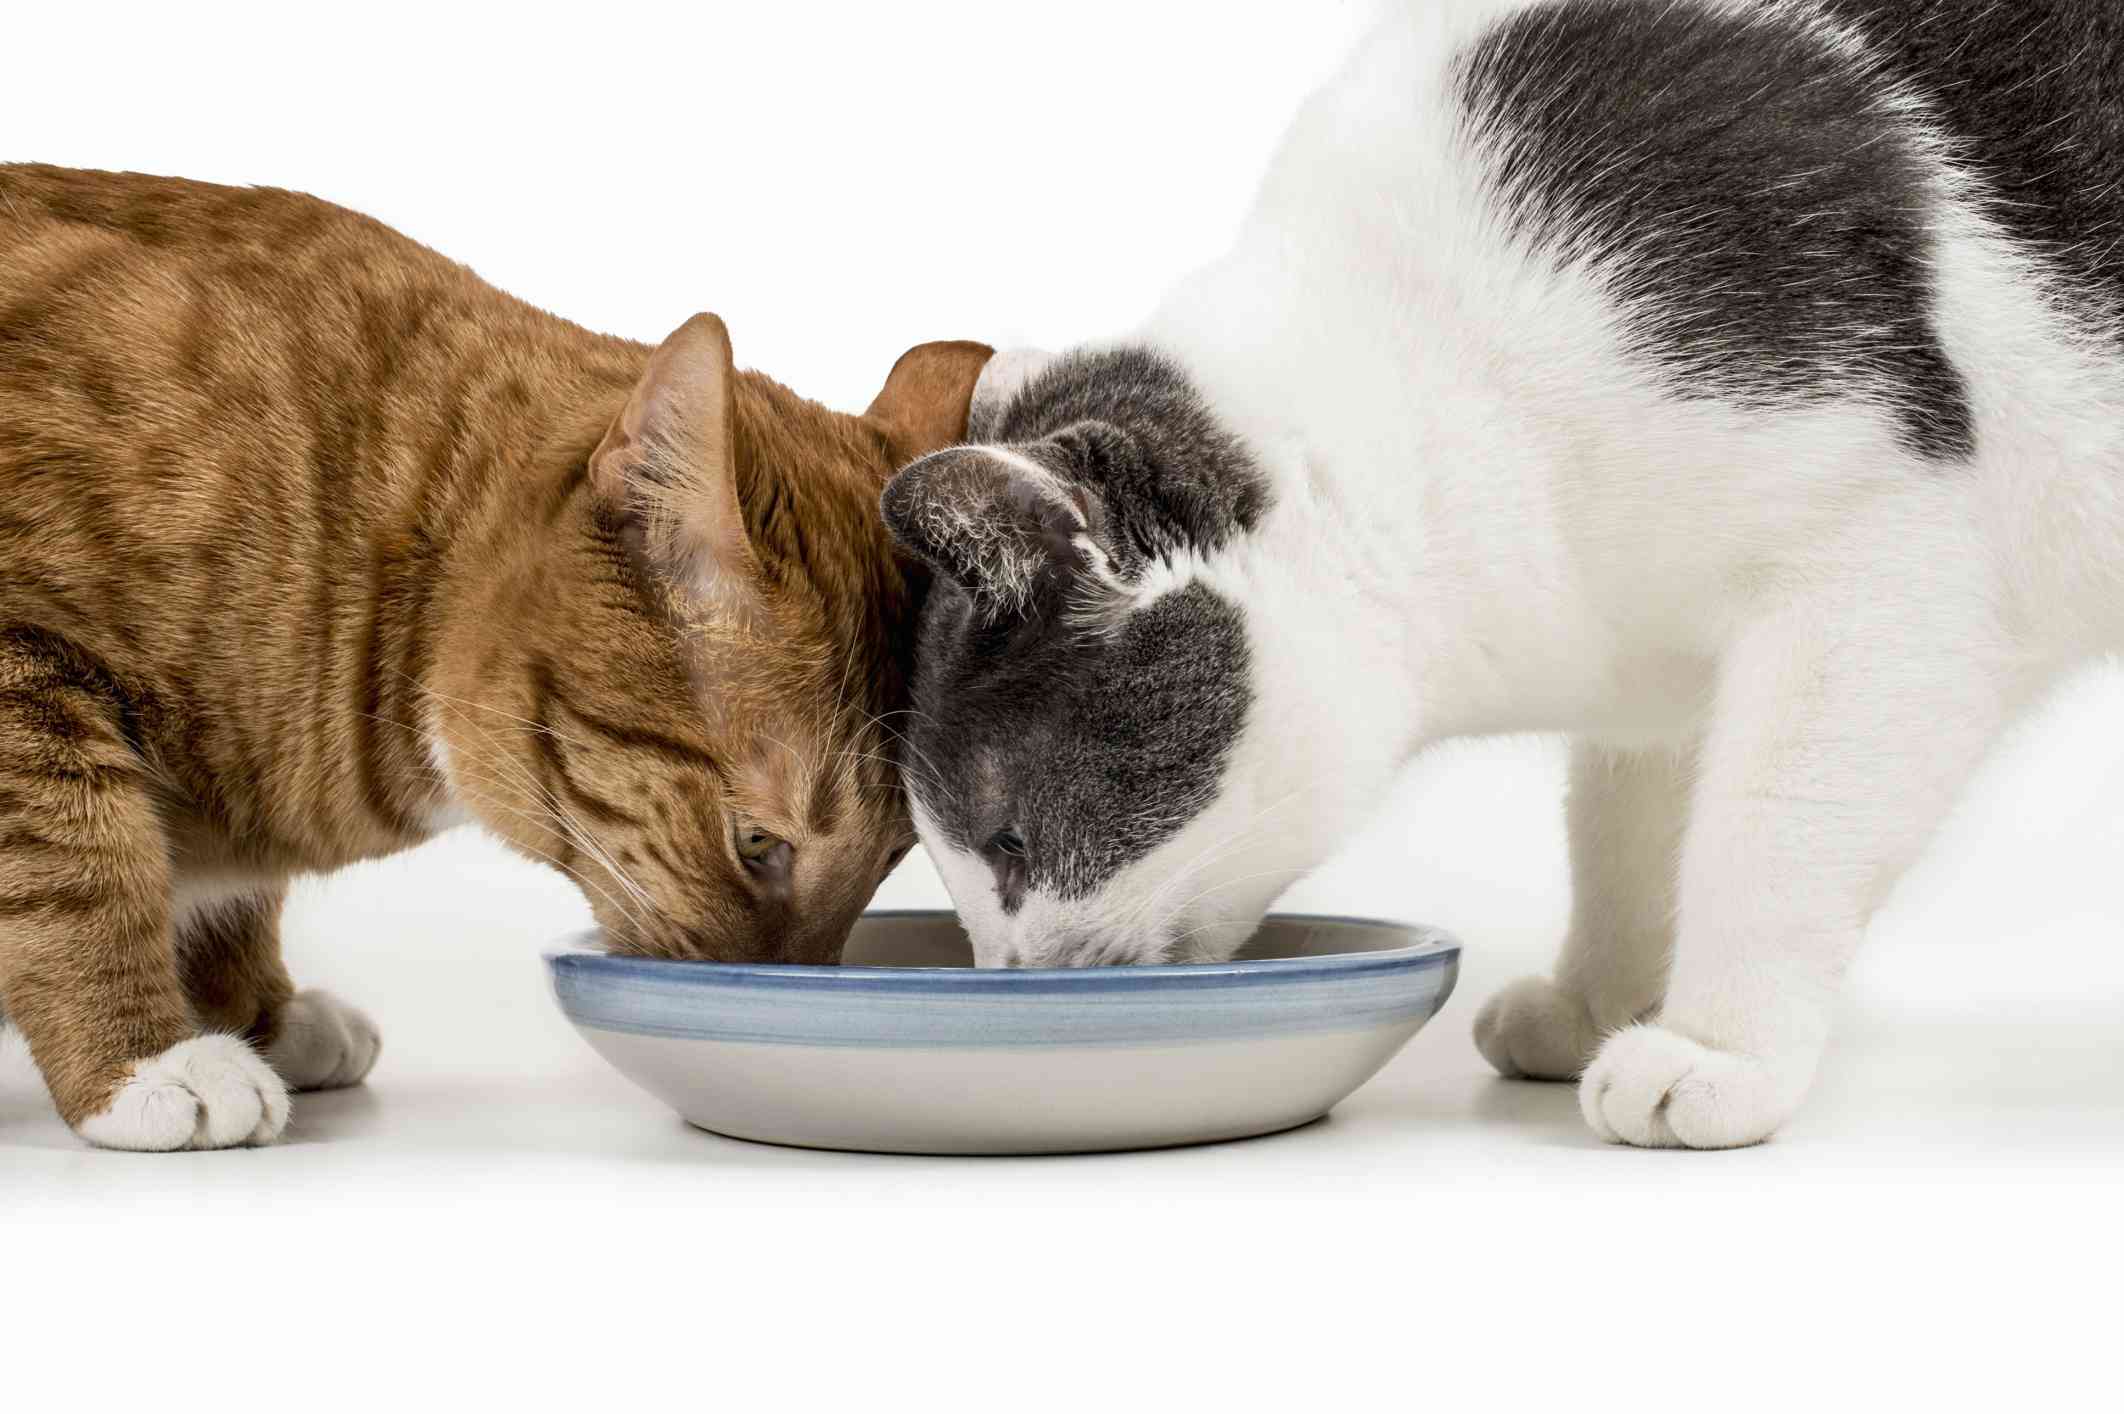 Two cats sharing dinner together